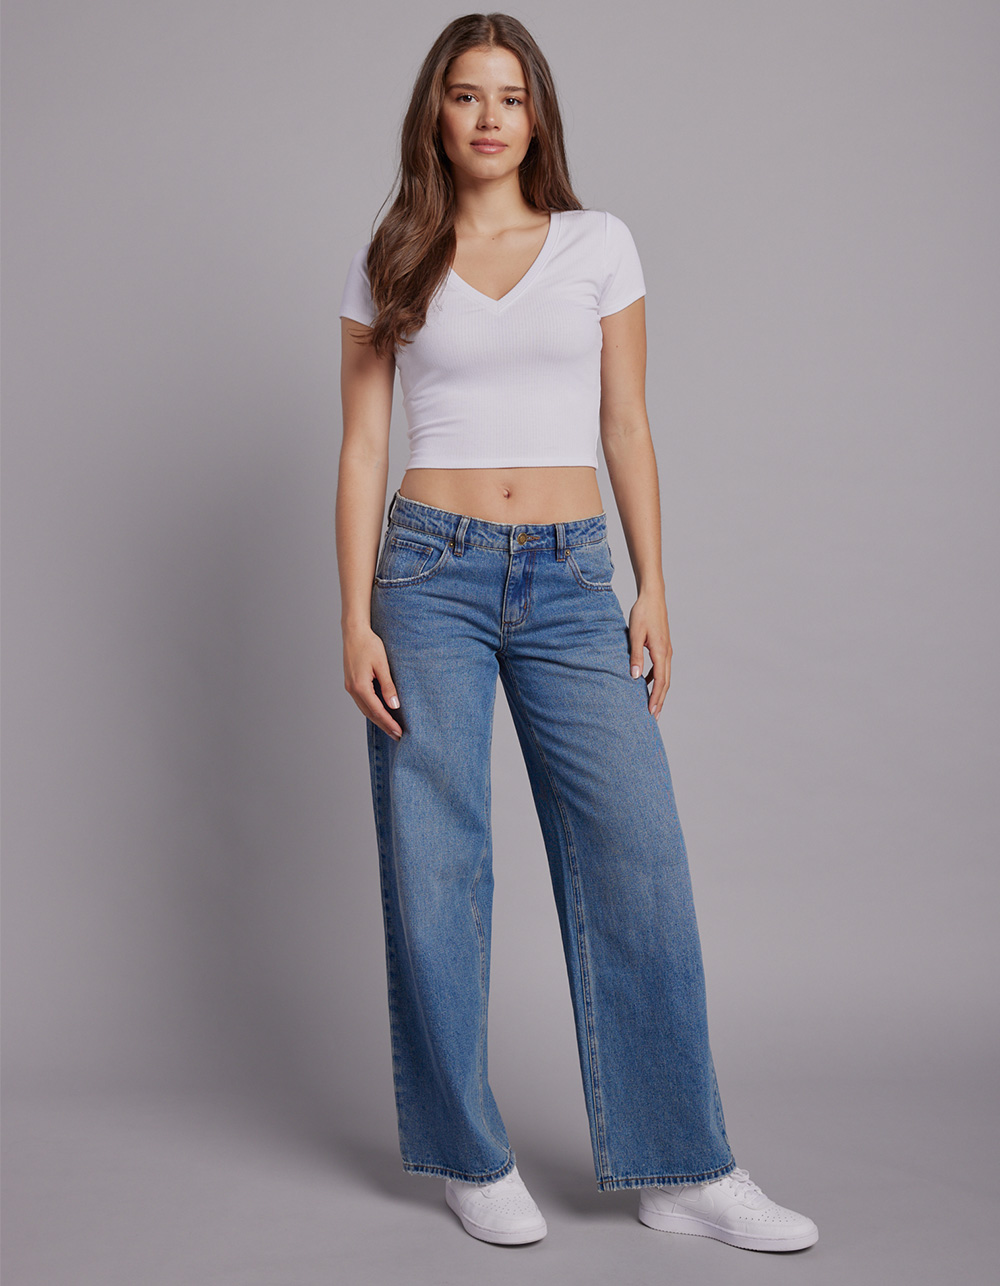 W A N T S Low Rise Baggy Jeans - Blue